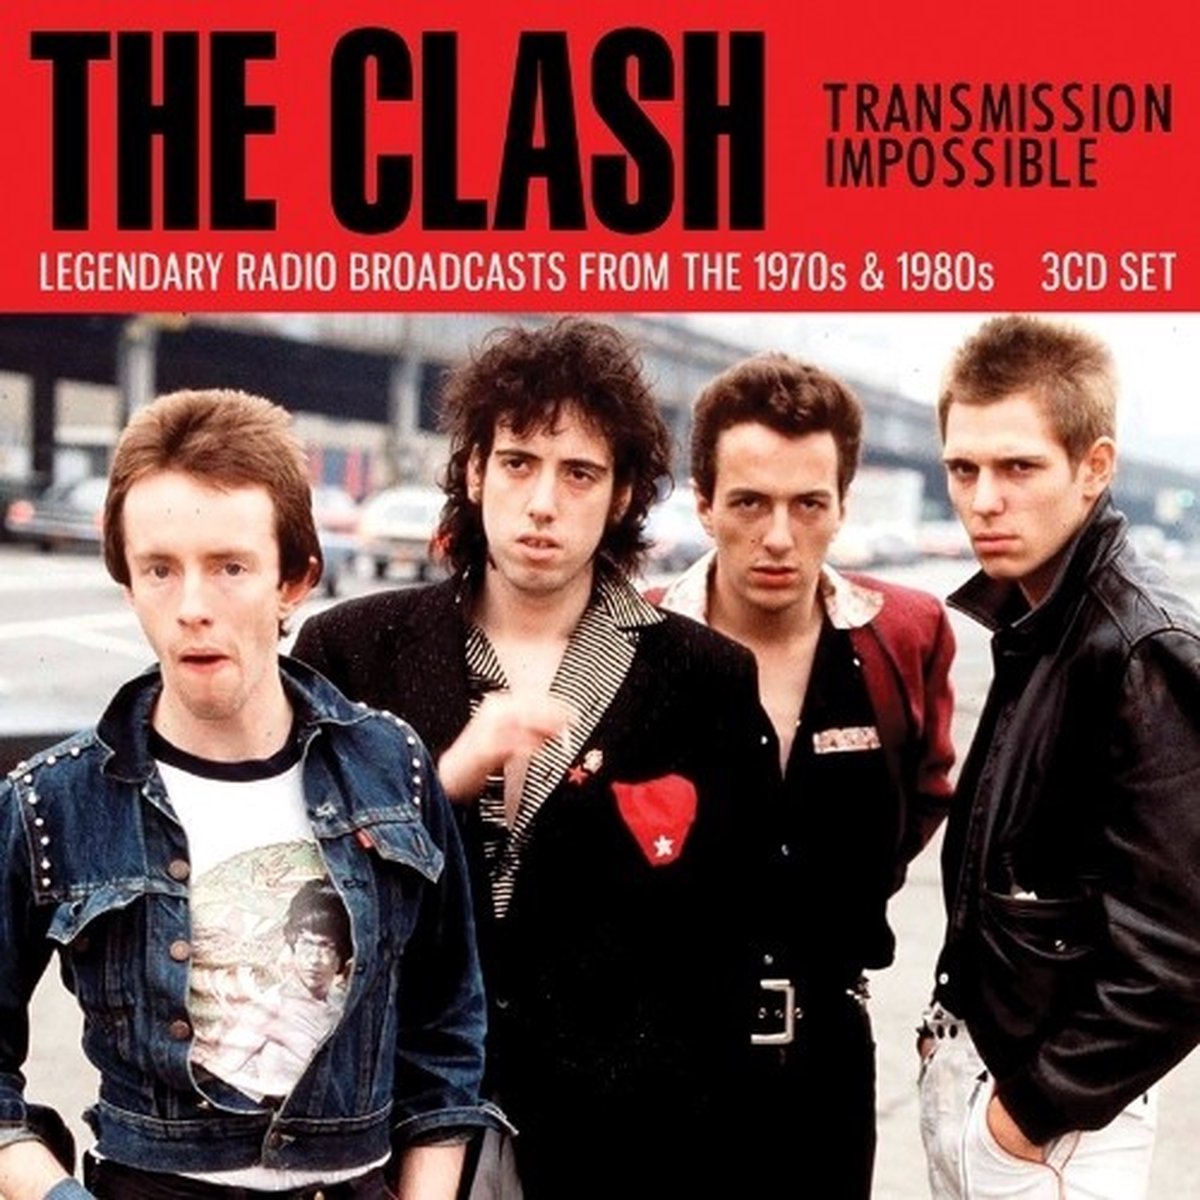 The Clash - Transmission Impossible (3 CD) - The Clash